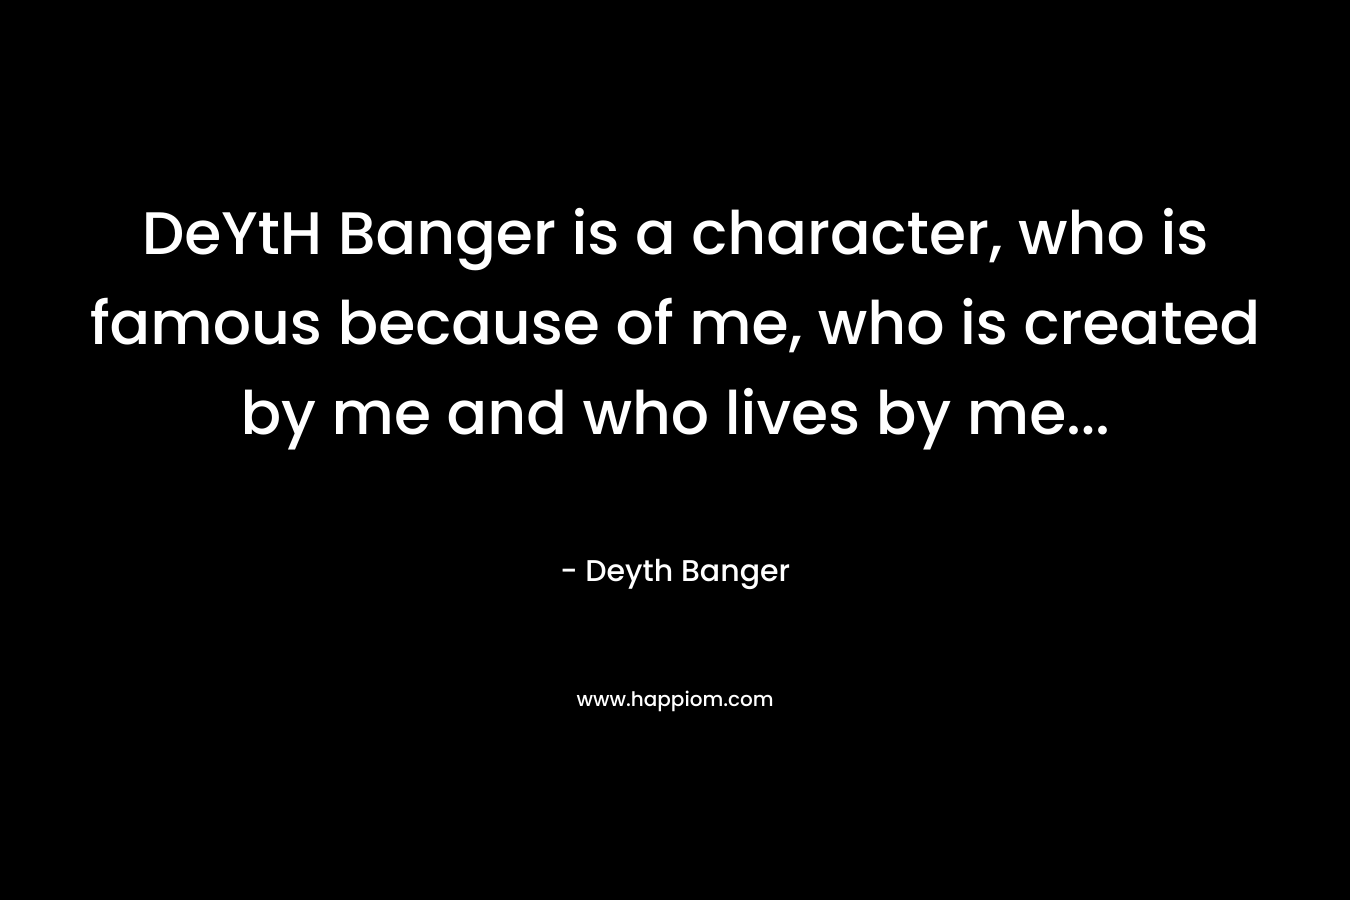 DeYtH Banger is a character, who is famous because of me, who is created by me and who lives by me...